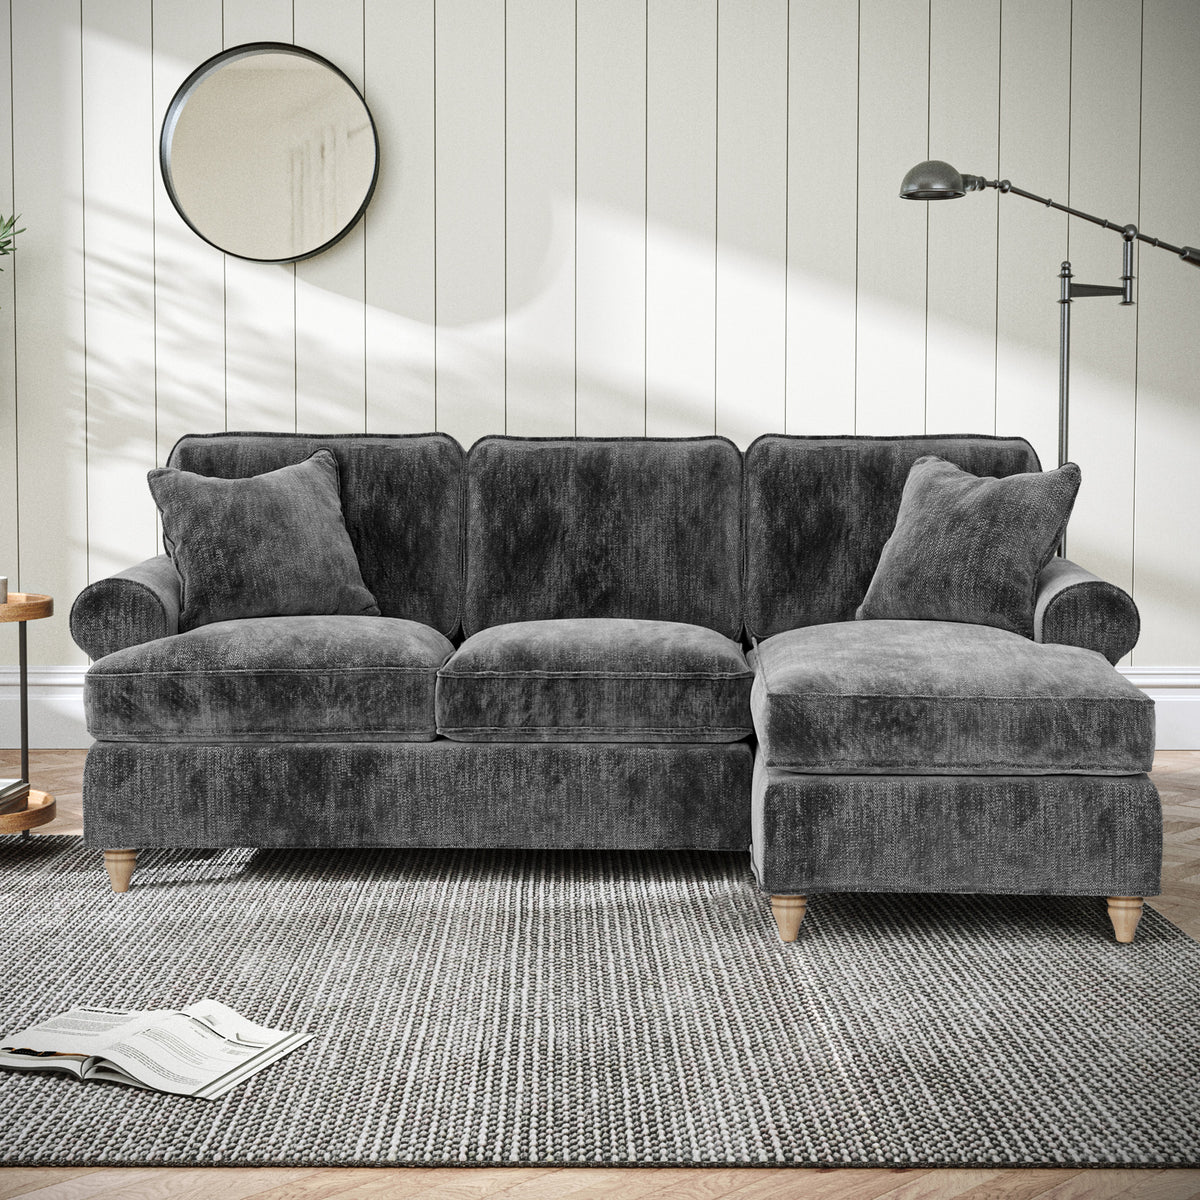 Alfie Chaise Sofa in Charcoal by Roseland Furniture